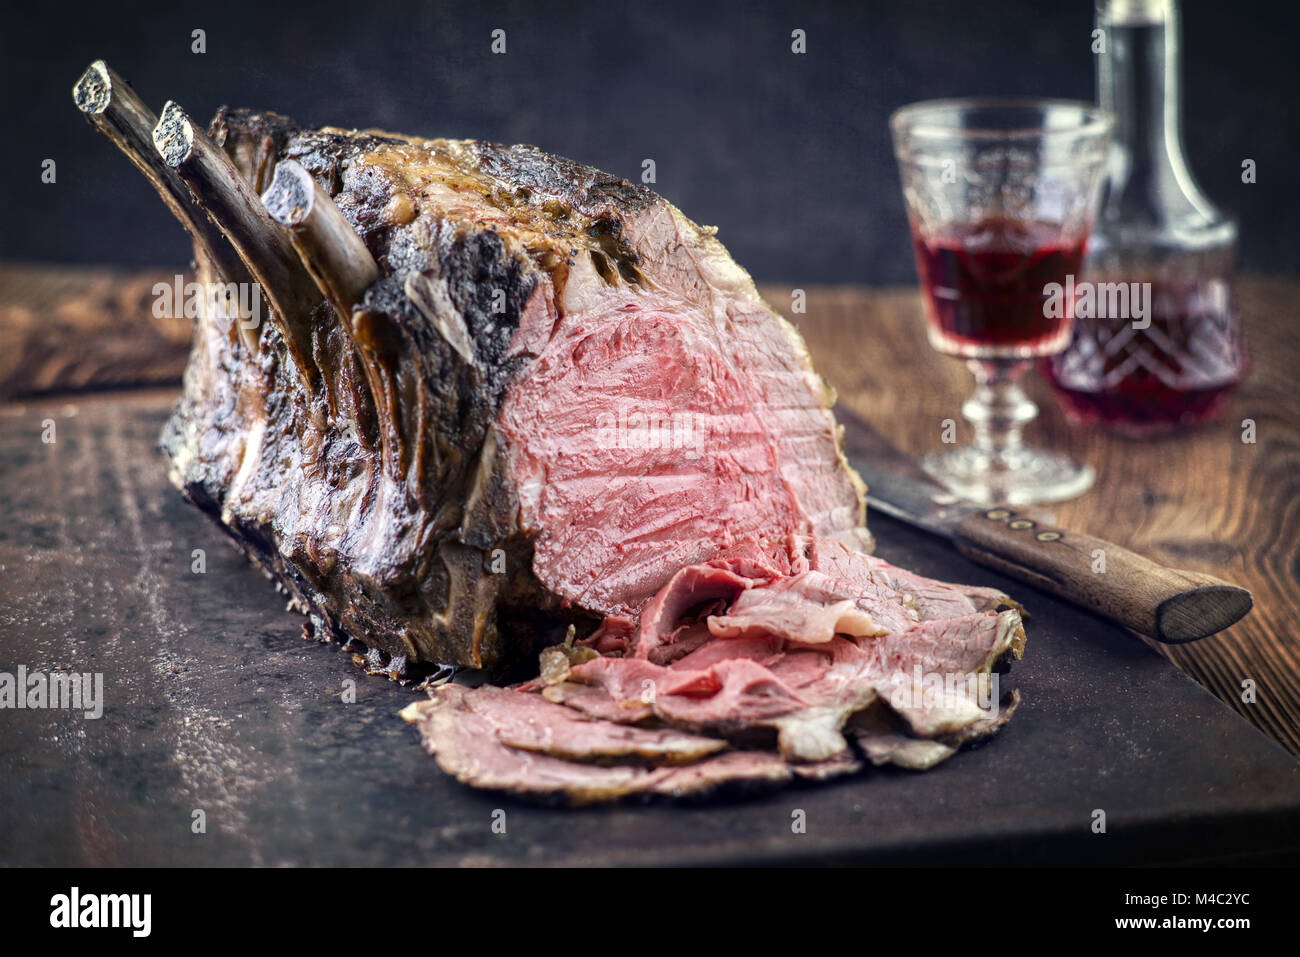 Rib of Beef Cold Cut on old Metal Sheet Stock Photo